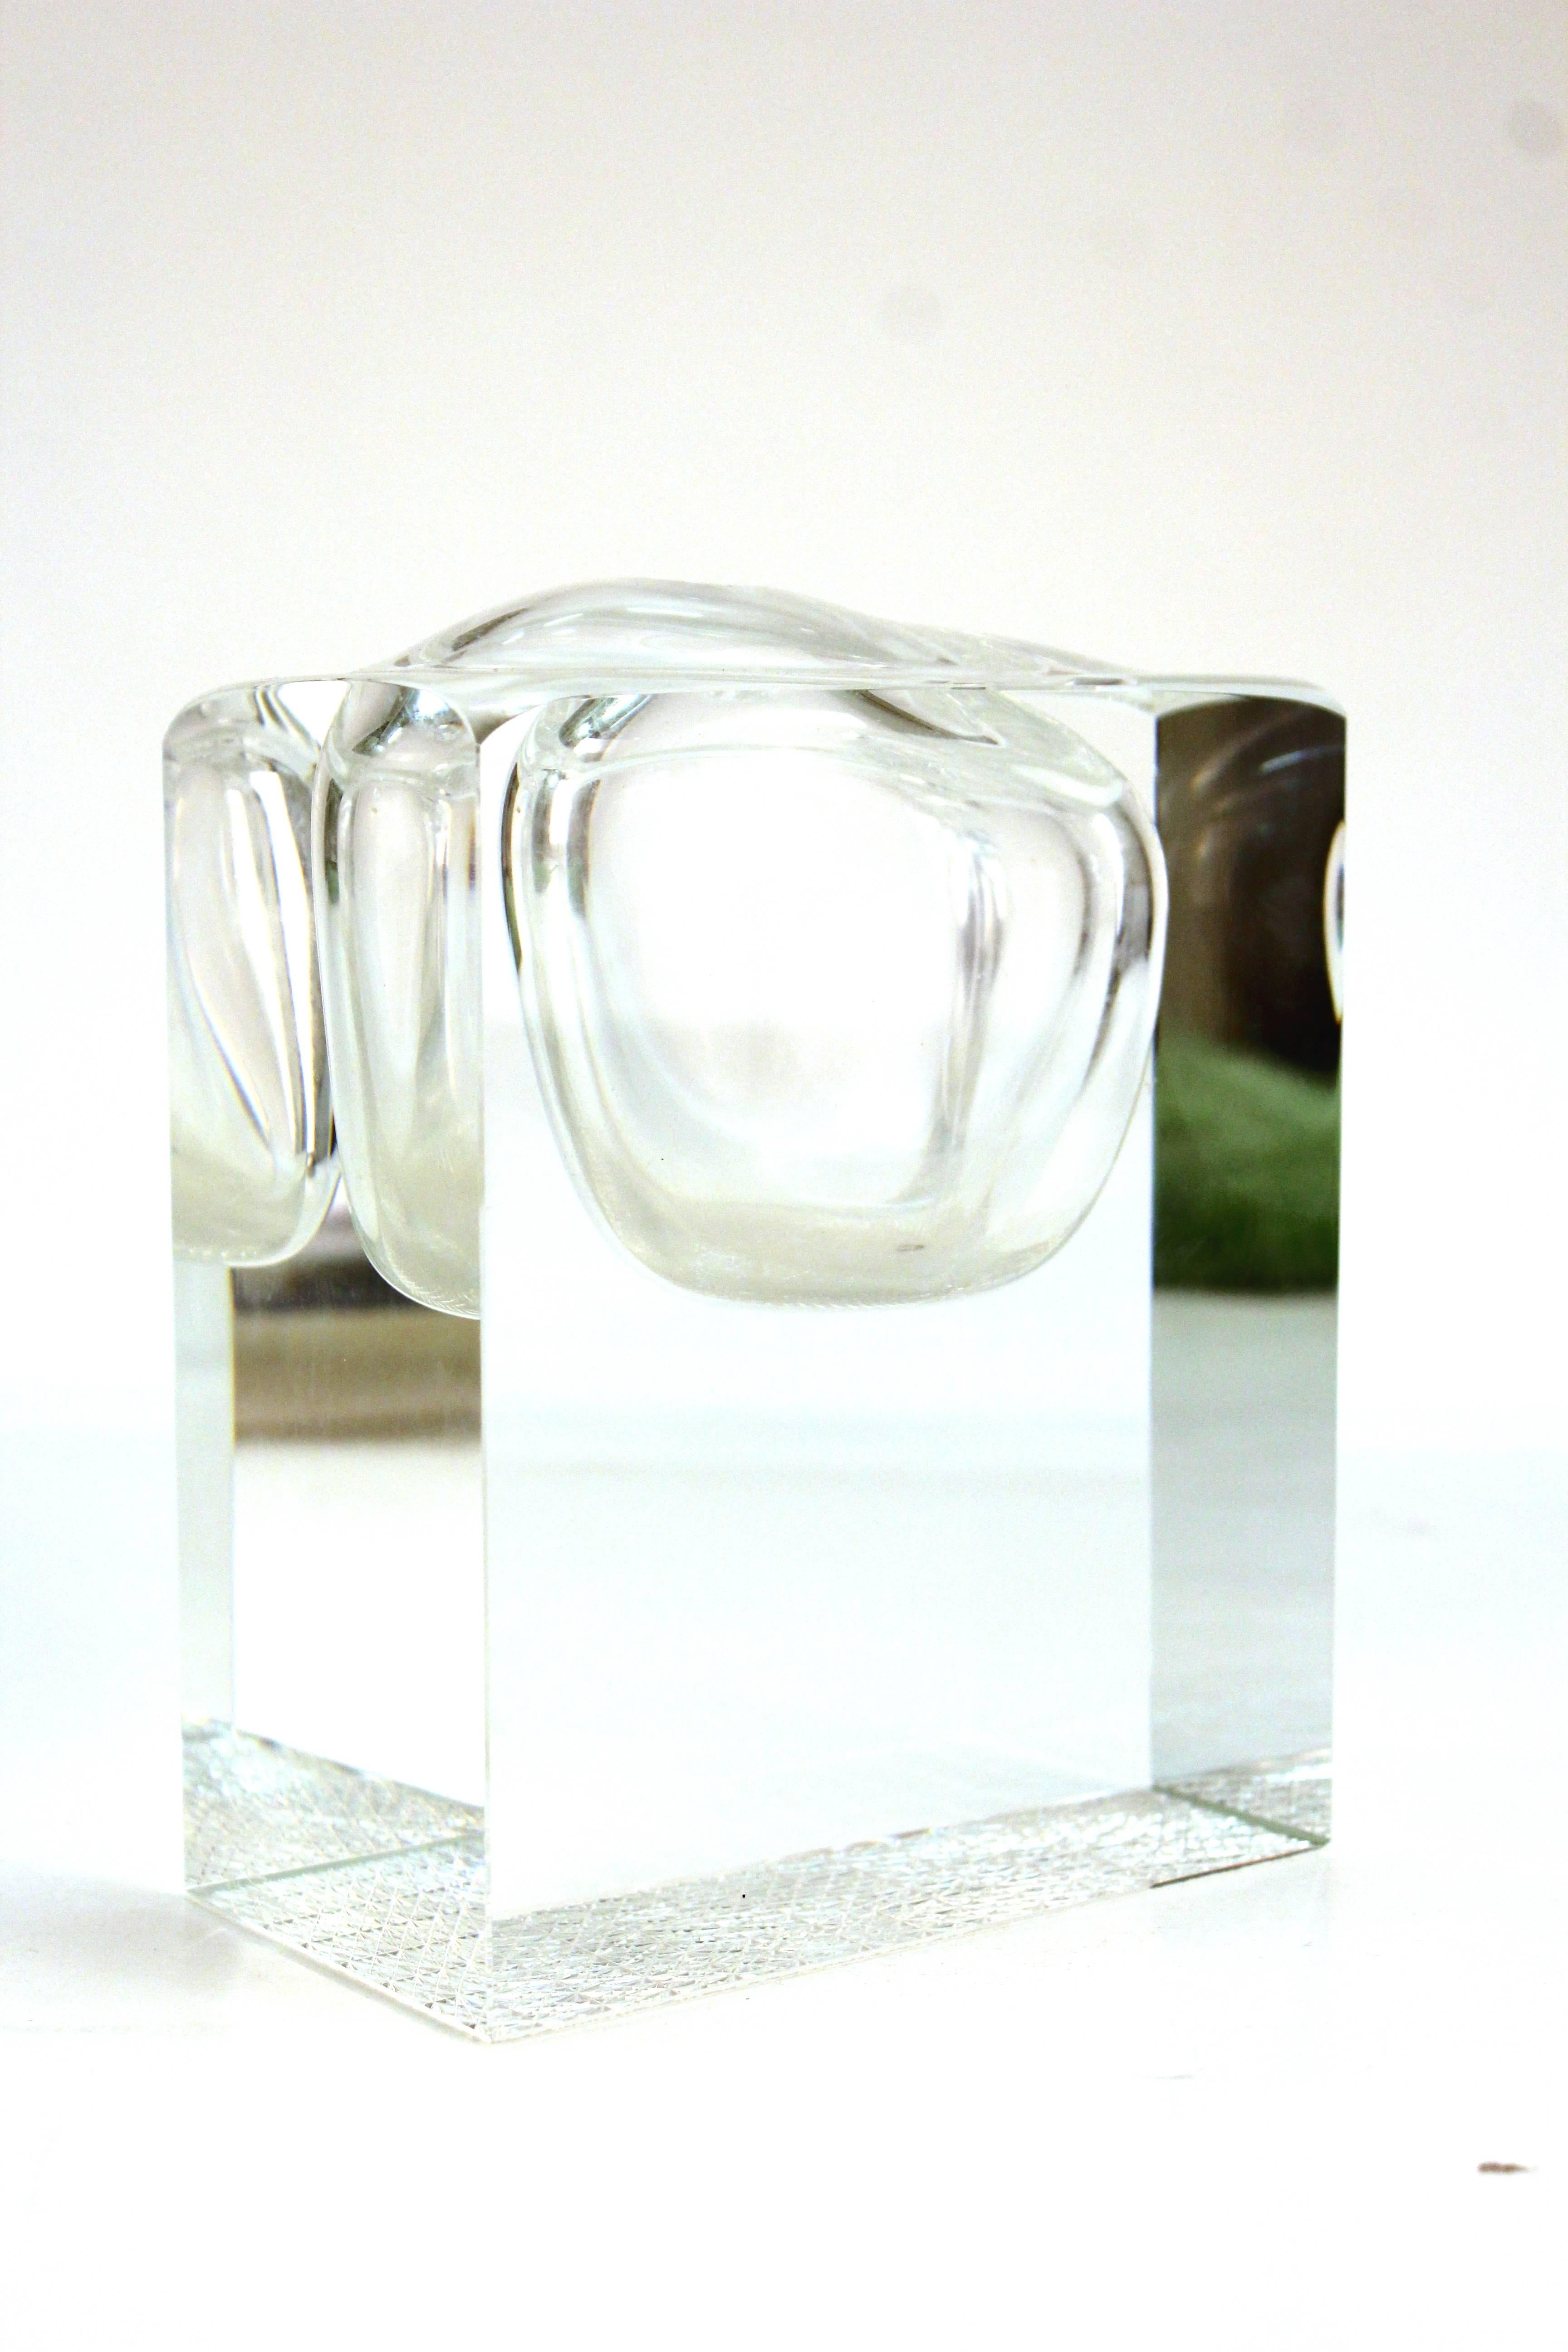 A Mid-Century Modern geometric lead crystal vase. Formed to look like a bubble in a larger block of crystal. Includes a hole at the top big enough for a single flower. The piece is illegibly signed. Despite a minor scratch on one side the piece is